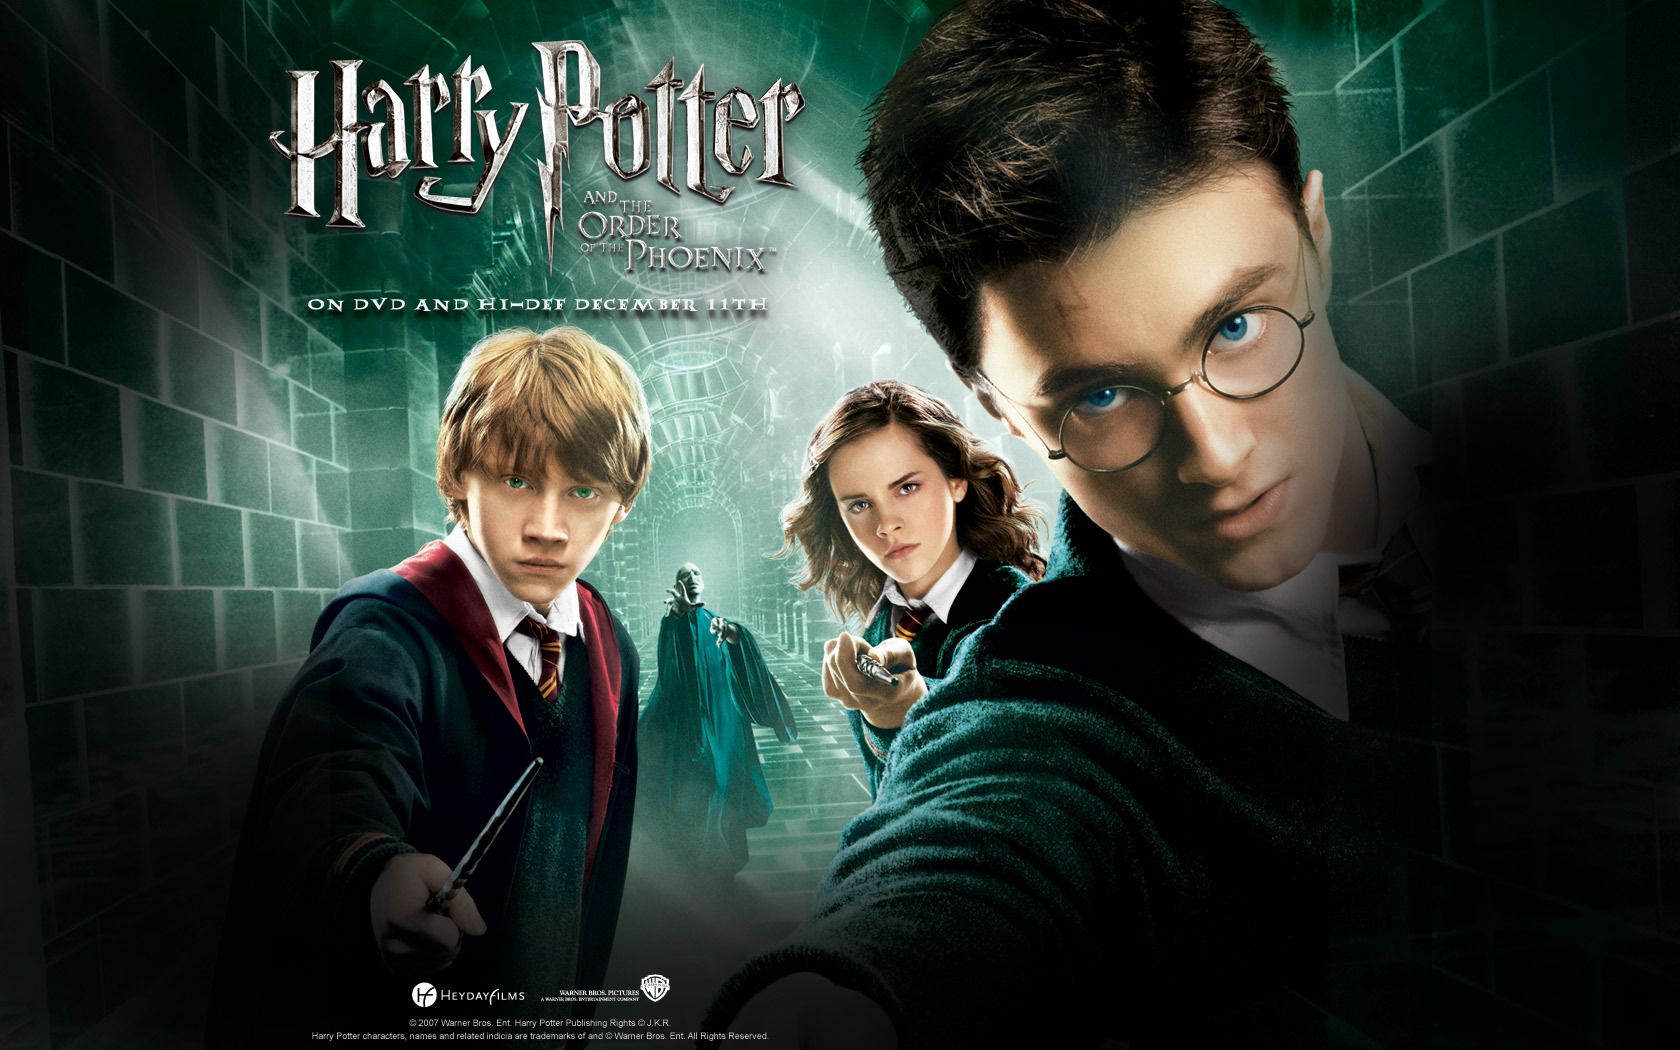 Harry potter 5 full movie in hindi free download hd